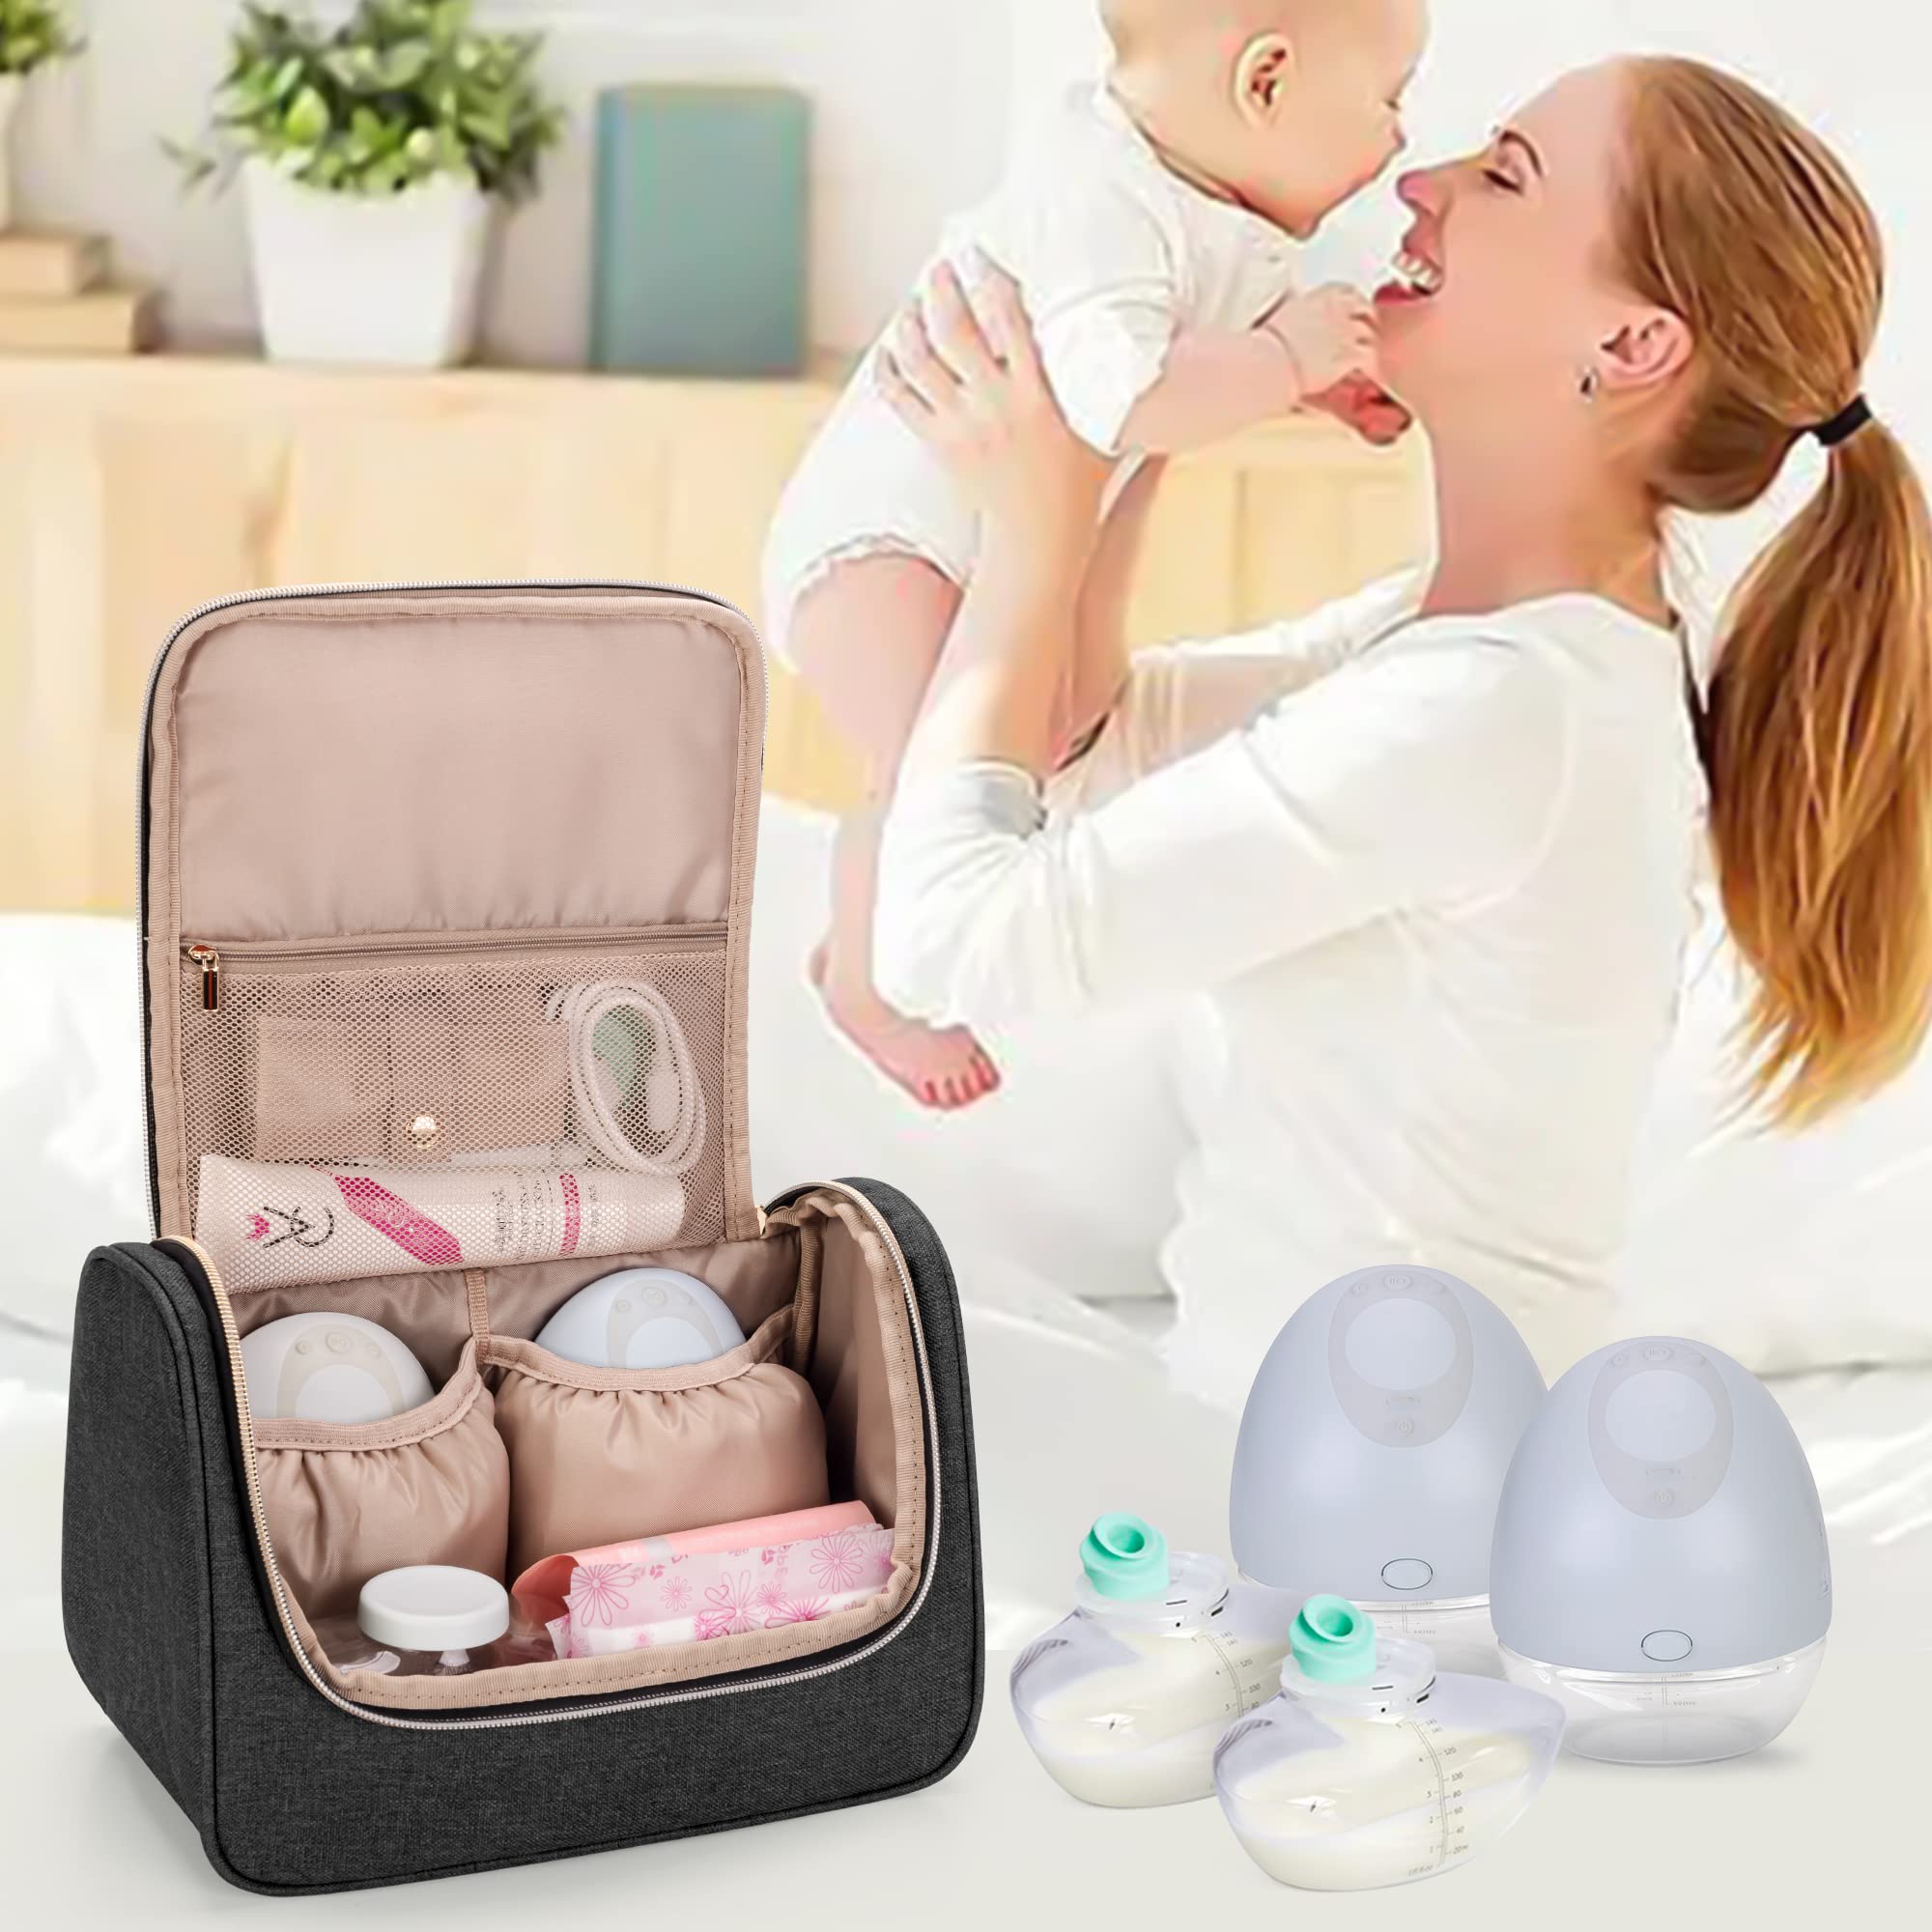 LUXJA Wearable Breast Pump Bag (with a Waterproof Mat) Compatible with Momcozy, Willow and Elvie Breast Pump, Carrying Case for Wearable Breast Pump and Extra Parts (Patent Pending), Black